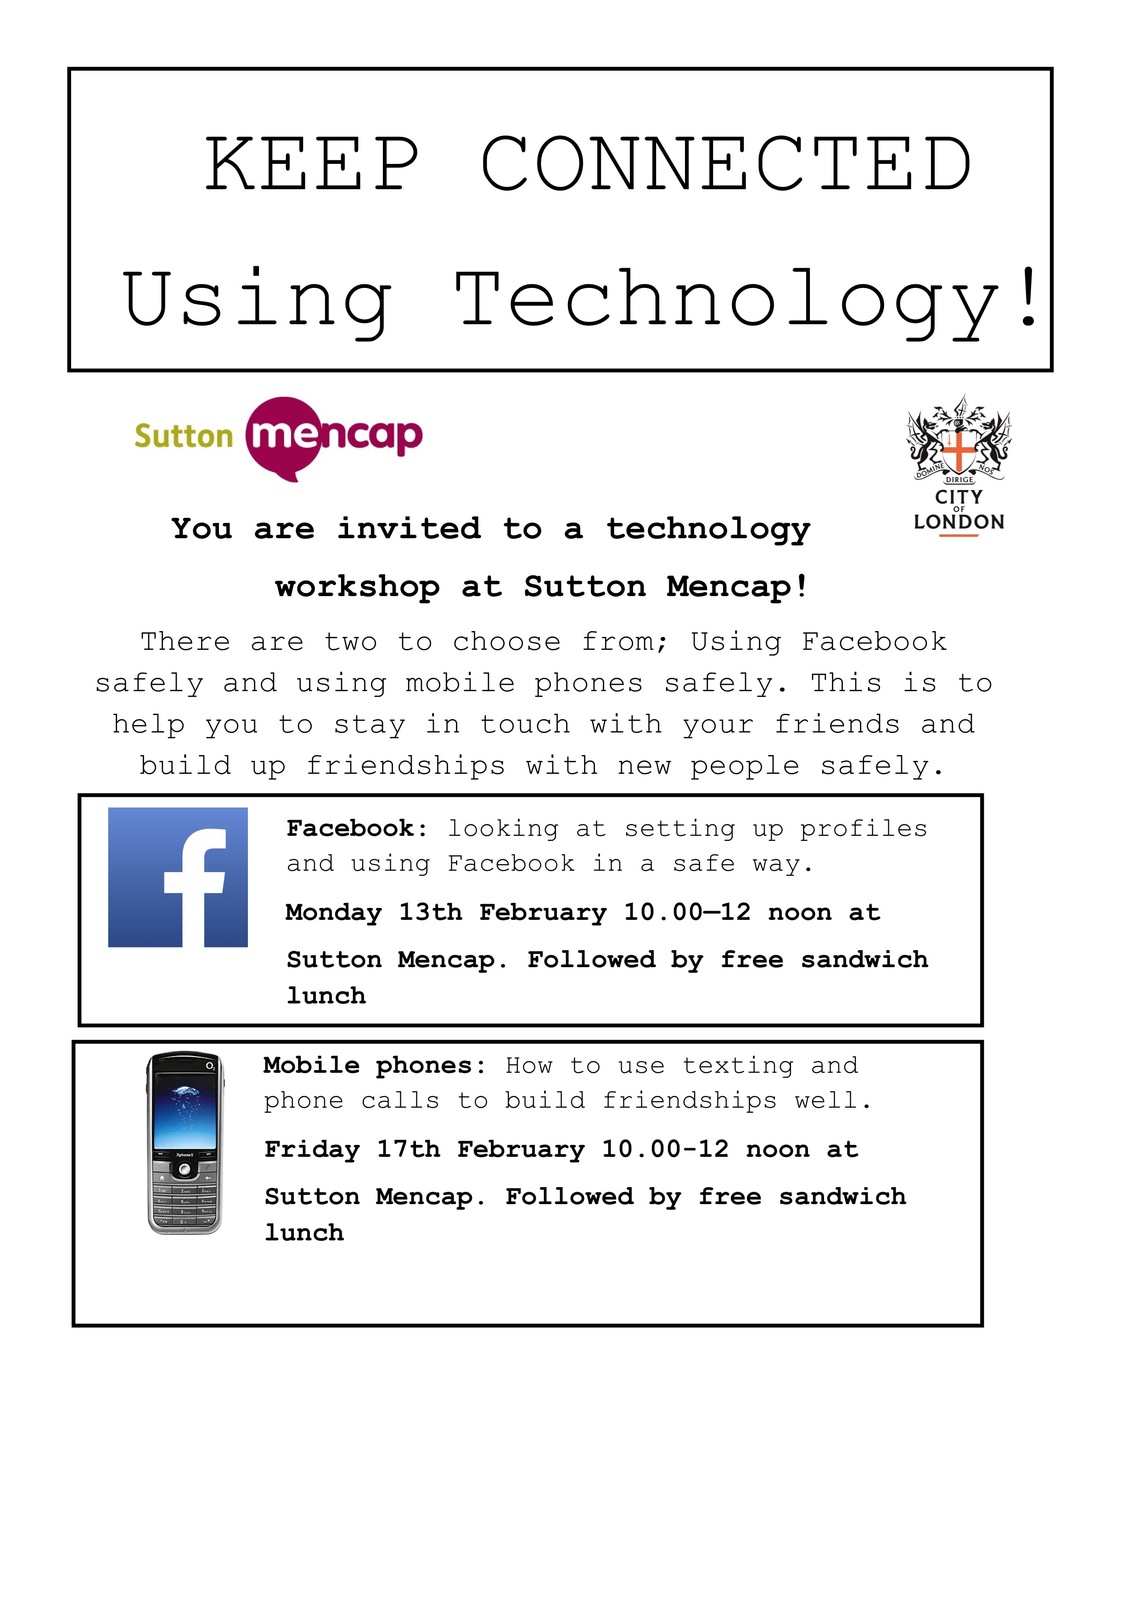 Free Facebook and mobile phone workshops